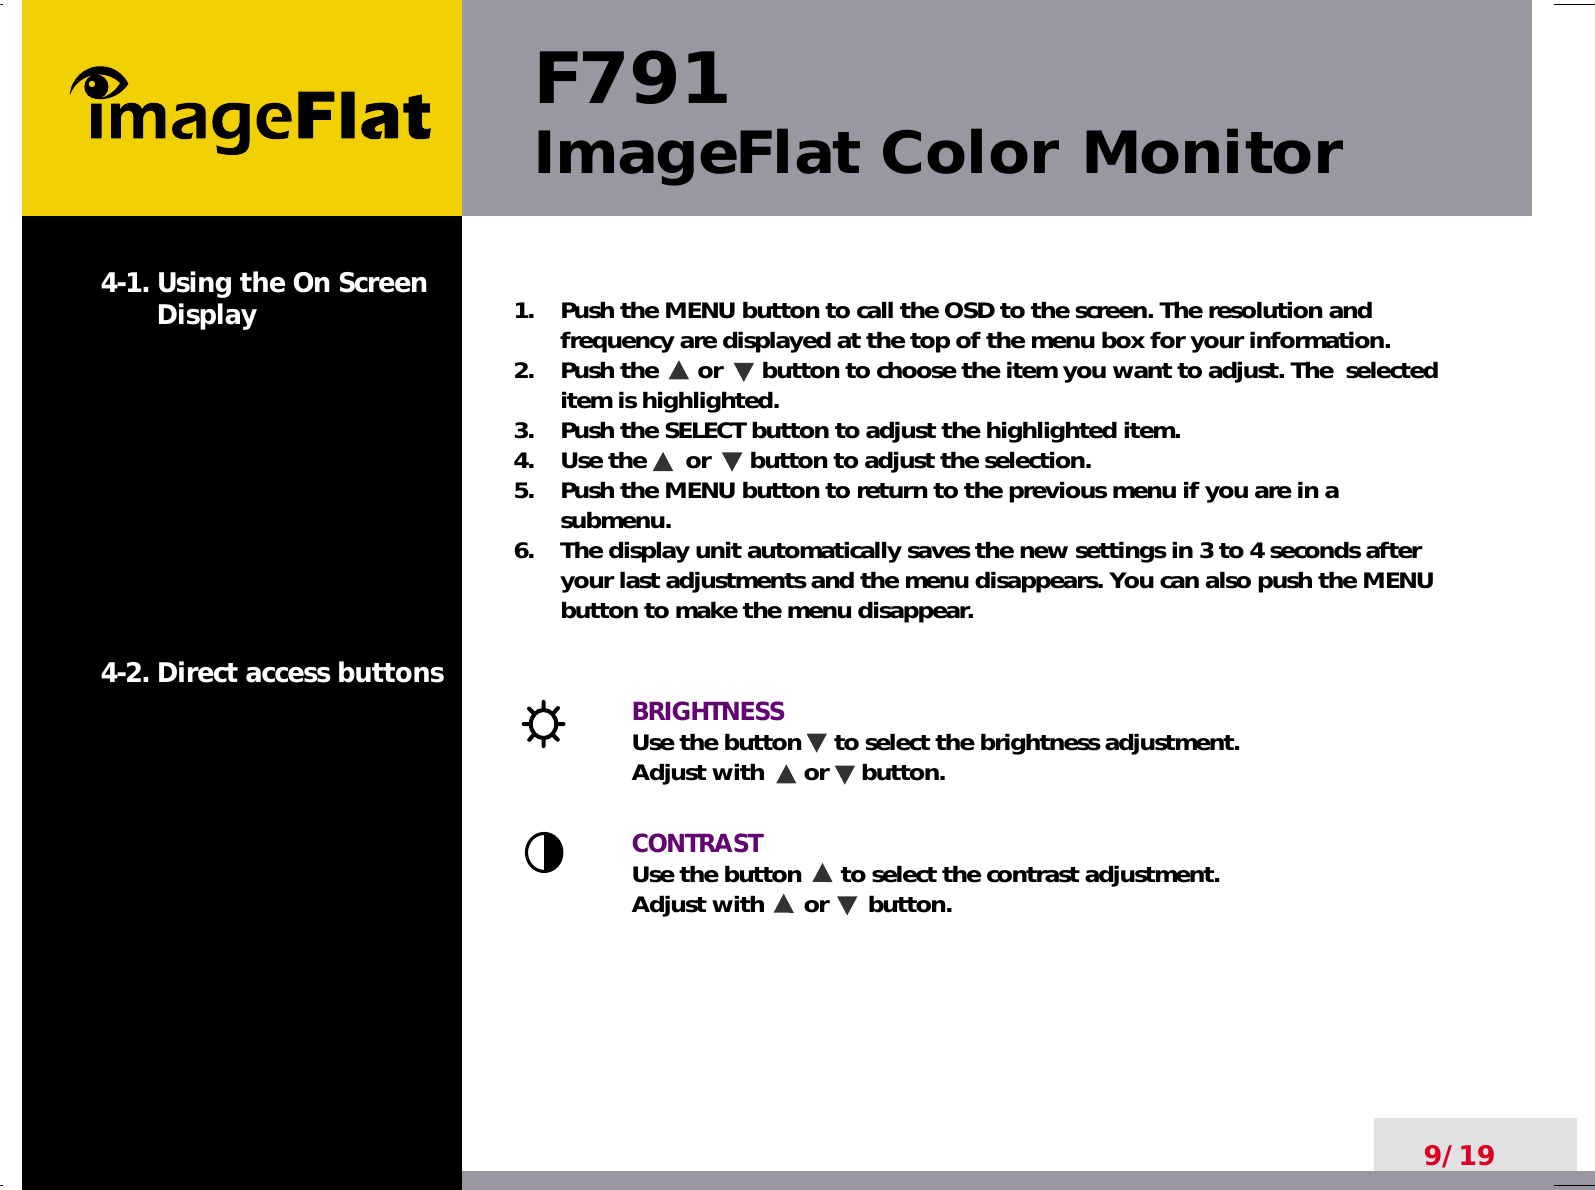 F791ImageFlat Color Monitor9/191.    Push the MENU button to call the OSD to the screen. The resolution andfrequency are displayed at the top of the menu box for your information.2.    Push the      or      button to choose the item you want to adjust. The  selecteditem is highlighted.3.    Push the SELECT button to adjust the highlighted item. 4.    Use the      or      button to adjust the selection.5.    Push the MENU button to return to the previous menu if you are in asubmenu.6.    The display unit automatically saves the new settings in 3 to 4 seconds afteryour last adjustments and the menu disappears. You can also push the MENUbutton to make the menu disappear.BRIGHTNESS Use the button     to select the brightness adjustment. Adjust with      or     button.CONTRASTUse the button      to select the contrast adjustment. Adjust with      or      button.4-1. Using the On ScreenDisplay 4-2. Direct access buttons